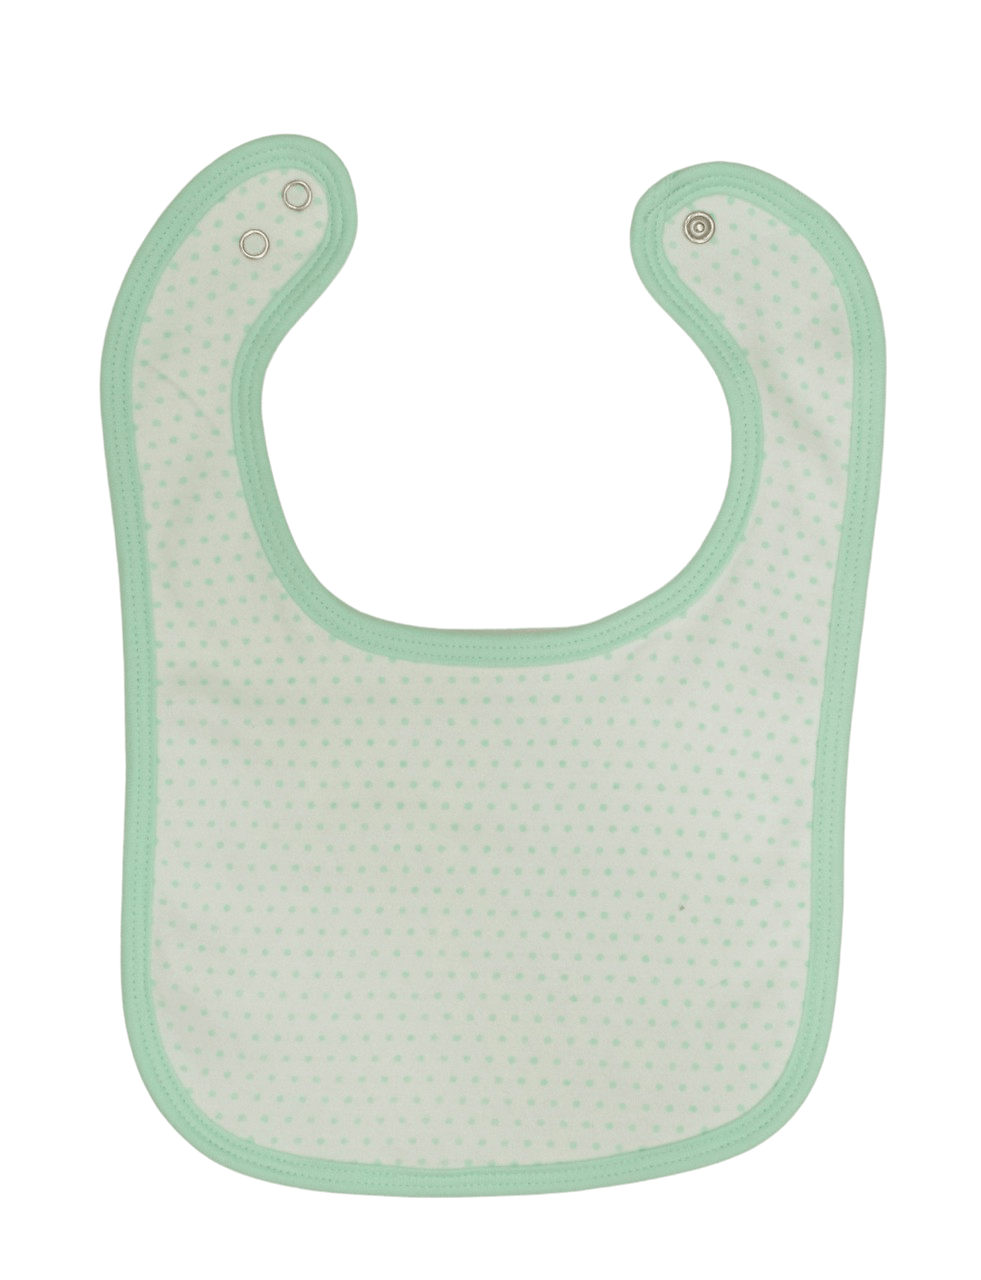 Snap Bib - Available in 4 Colors Passion Lilie - Free